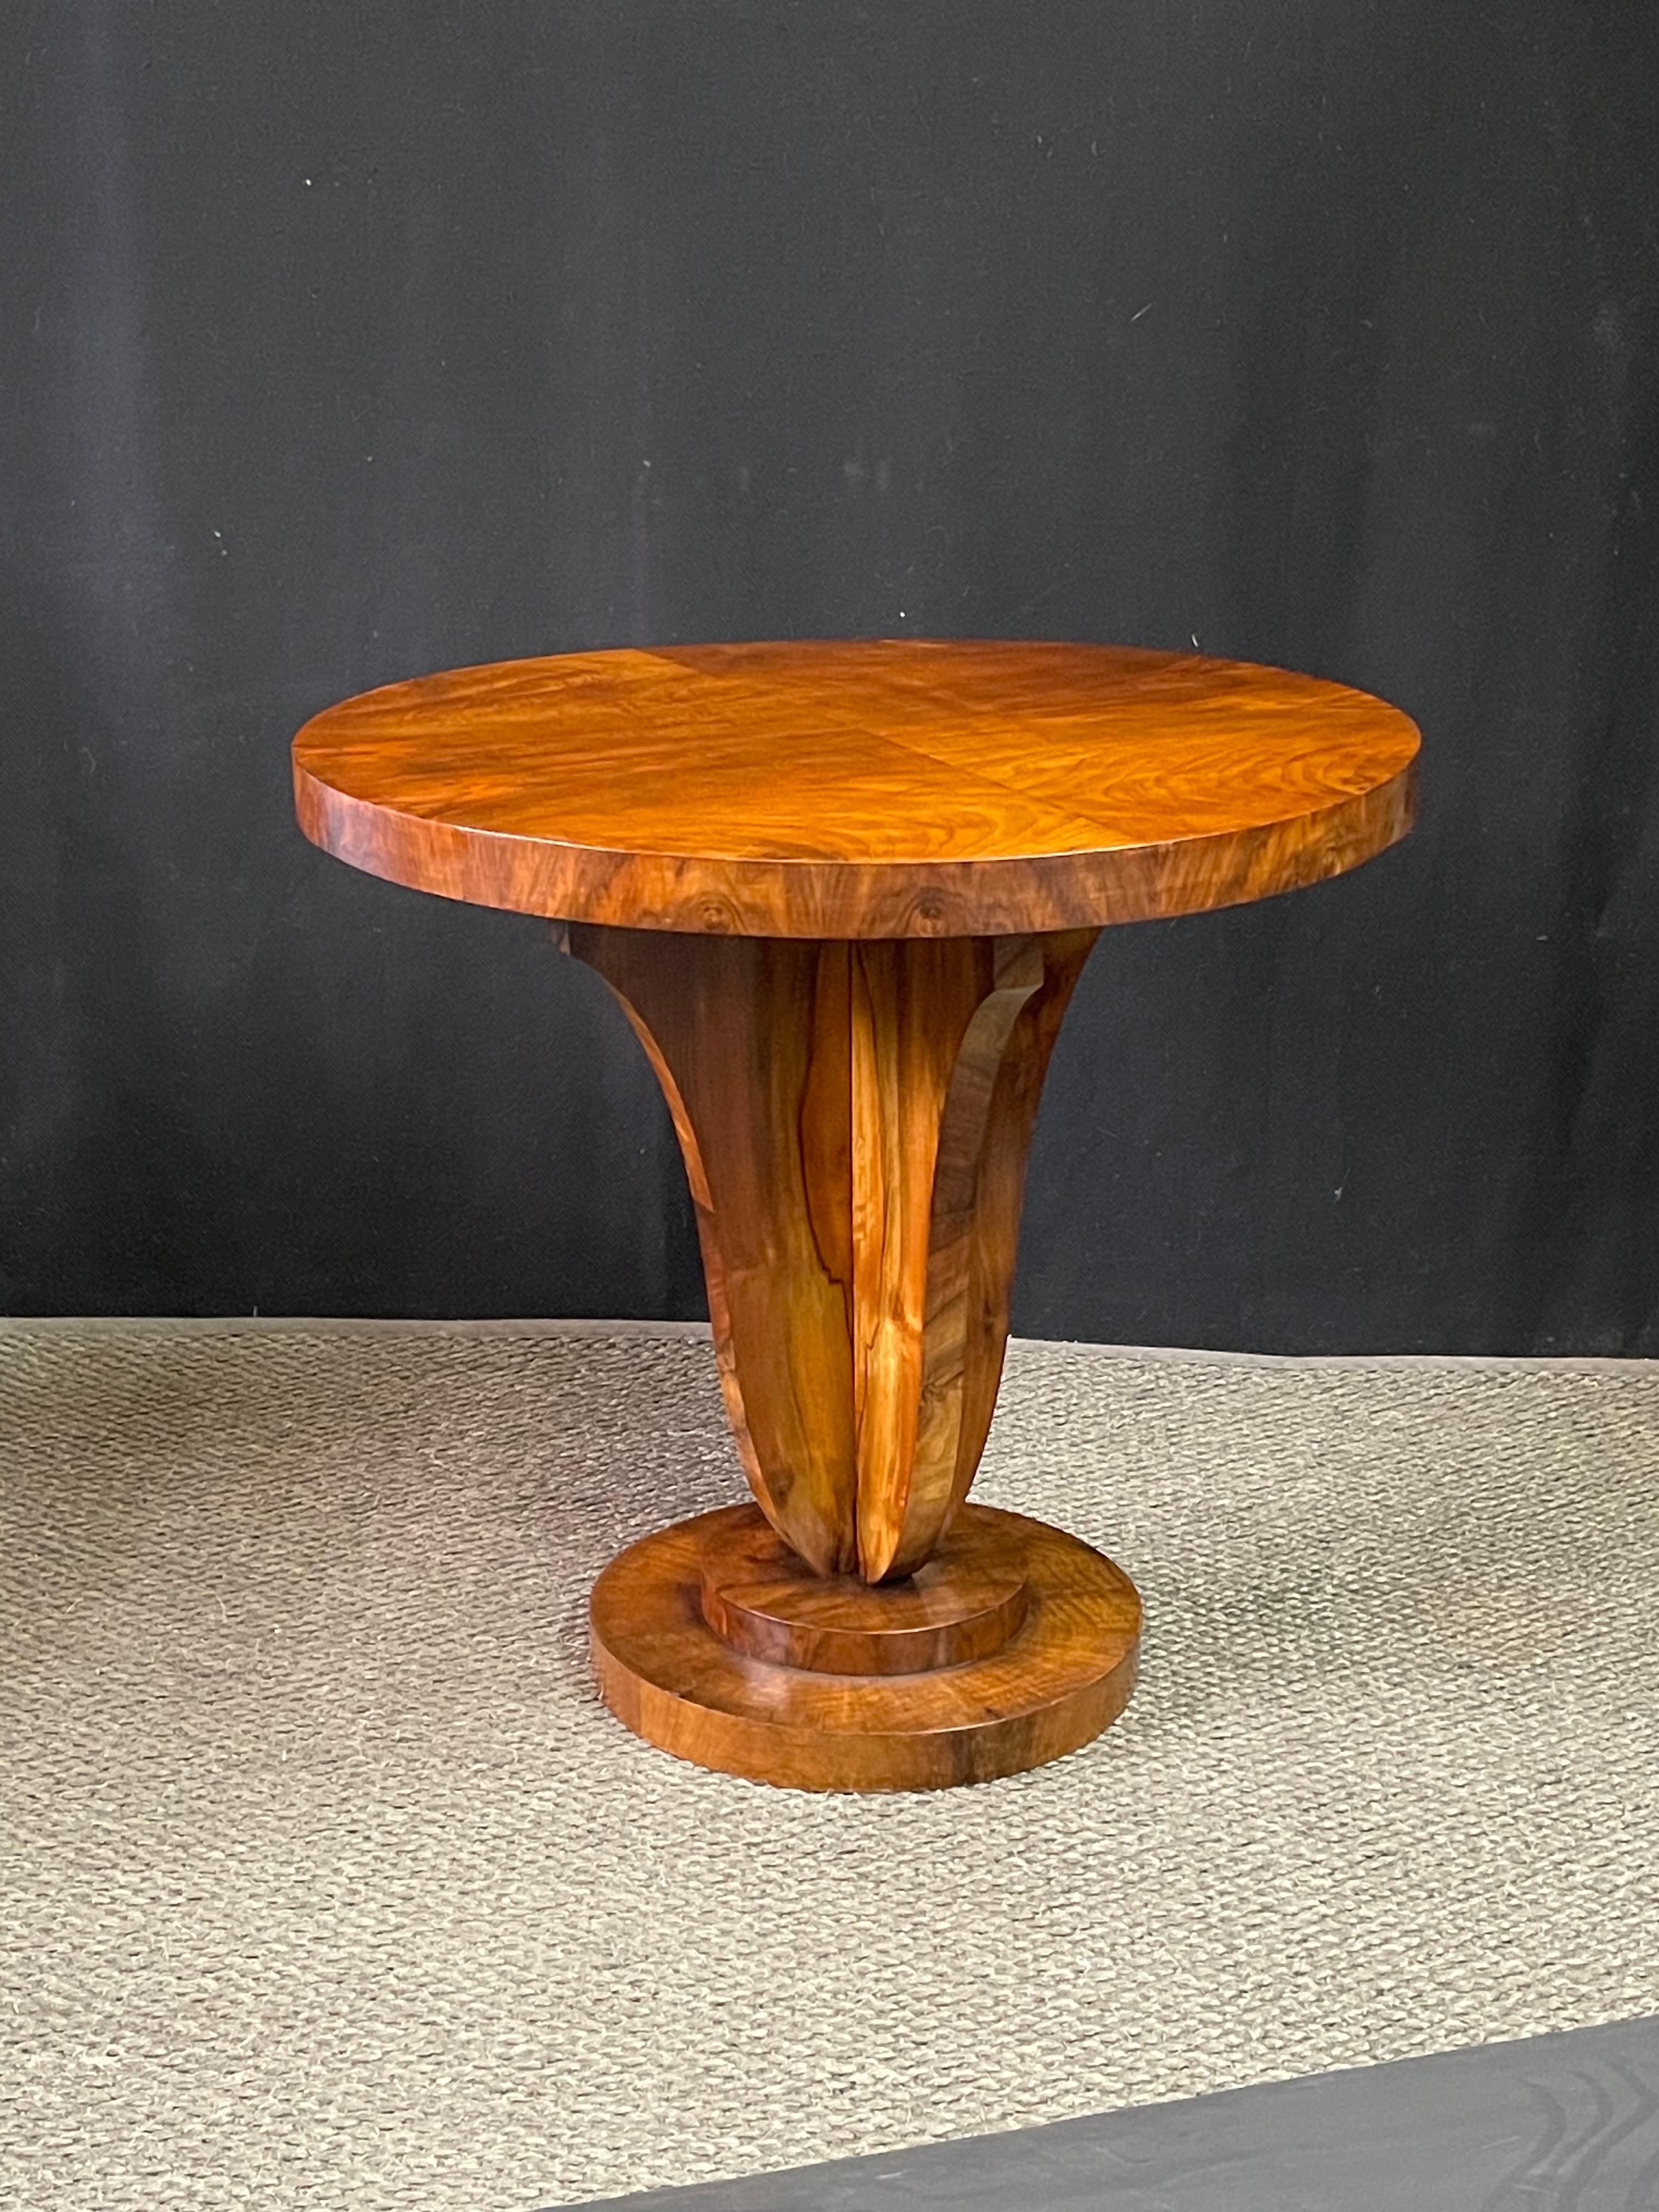 Early 20th century Italian side table of beautifully burled walnut made during the Art Deco period. A thick round table top is veneered in a book-matched walnut and rests on a winged pedestal that elegantly tapers to a two tier platform base. The